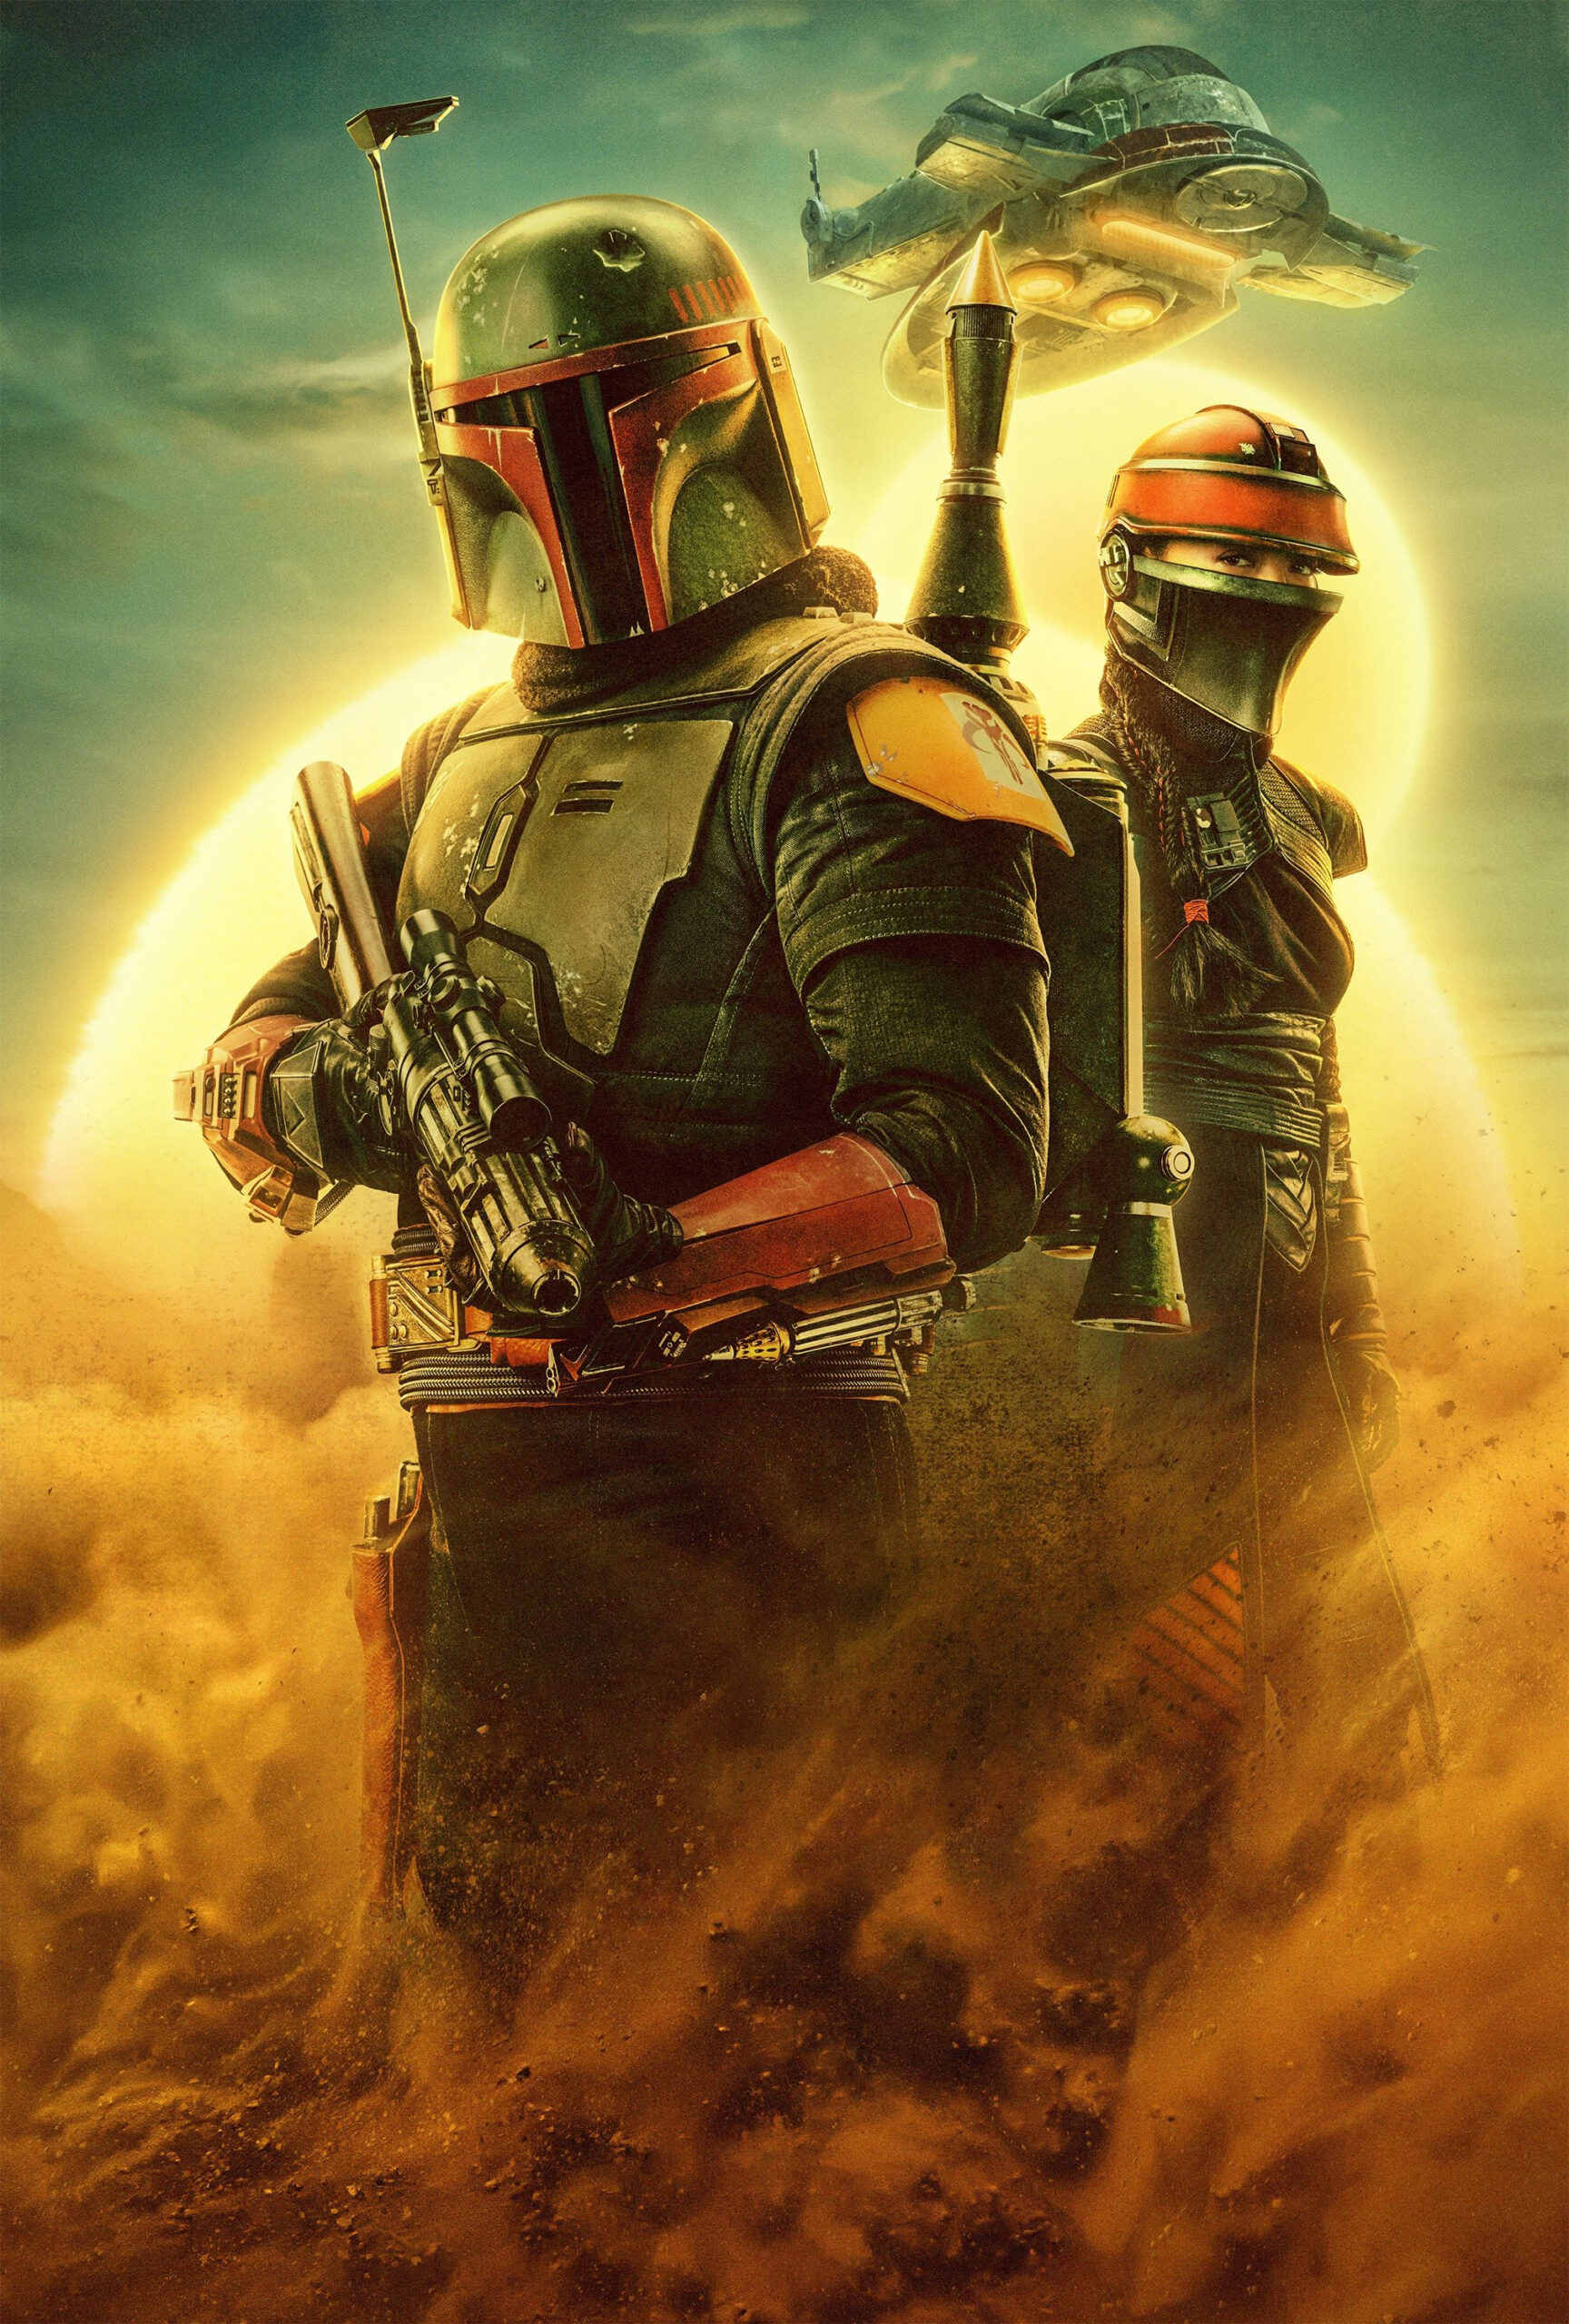 Textless Image of The Book of Boba Fett Key Art and Empire Magazine January 2022 Newsstand Cover